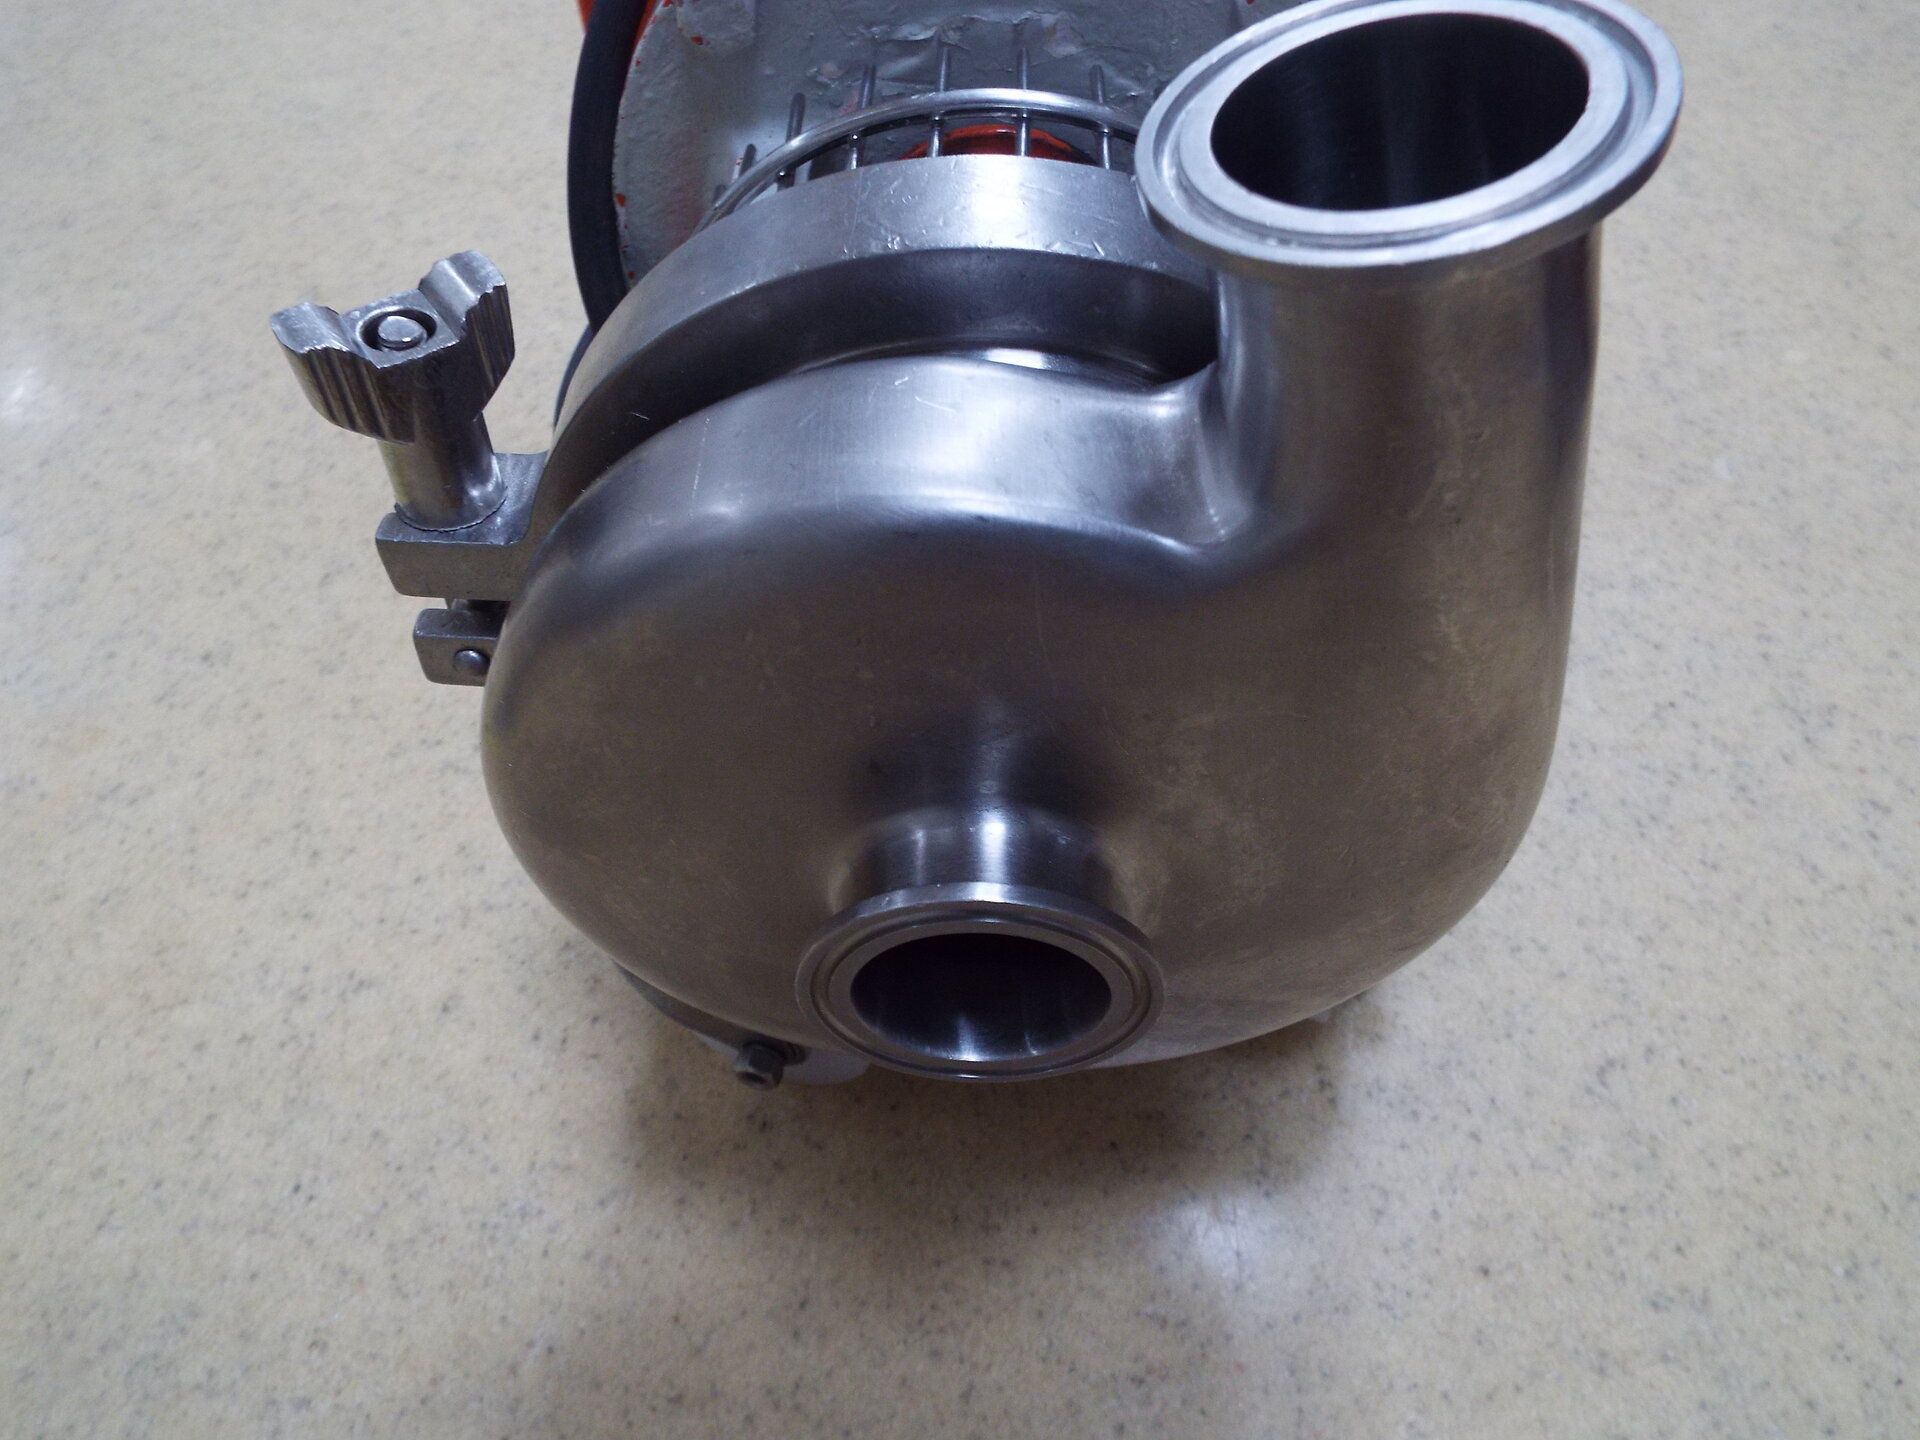 1 HP stainless steel centrifgual pump with 6" diameter impeller stainless steel base on casters - Image 2 of 2